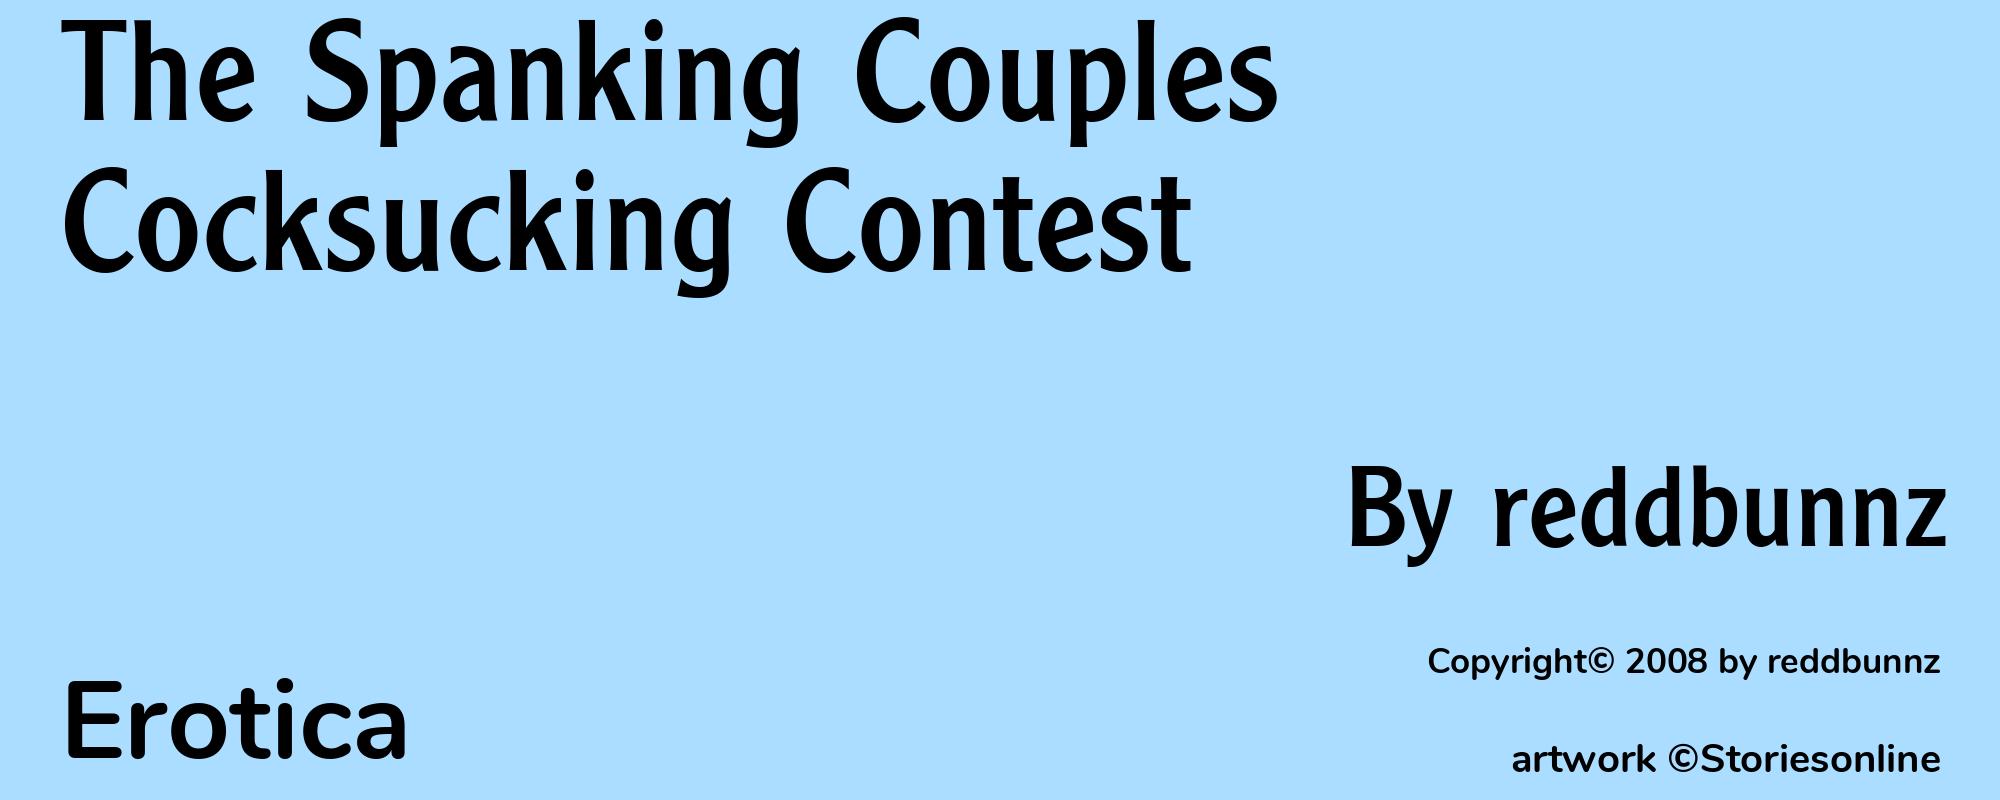 The Spanking Couples Cocksucking Contest - Cover